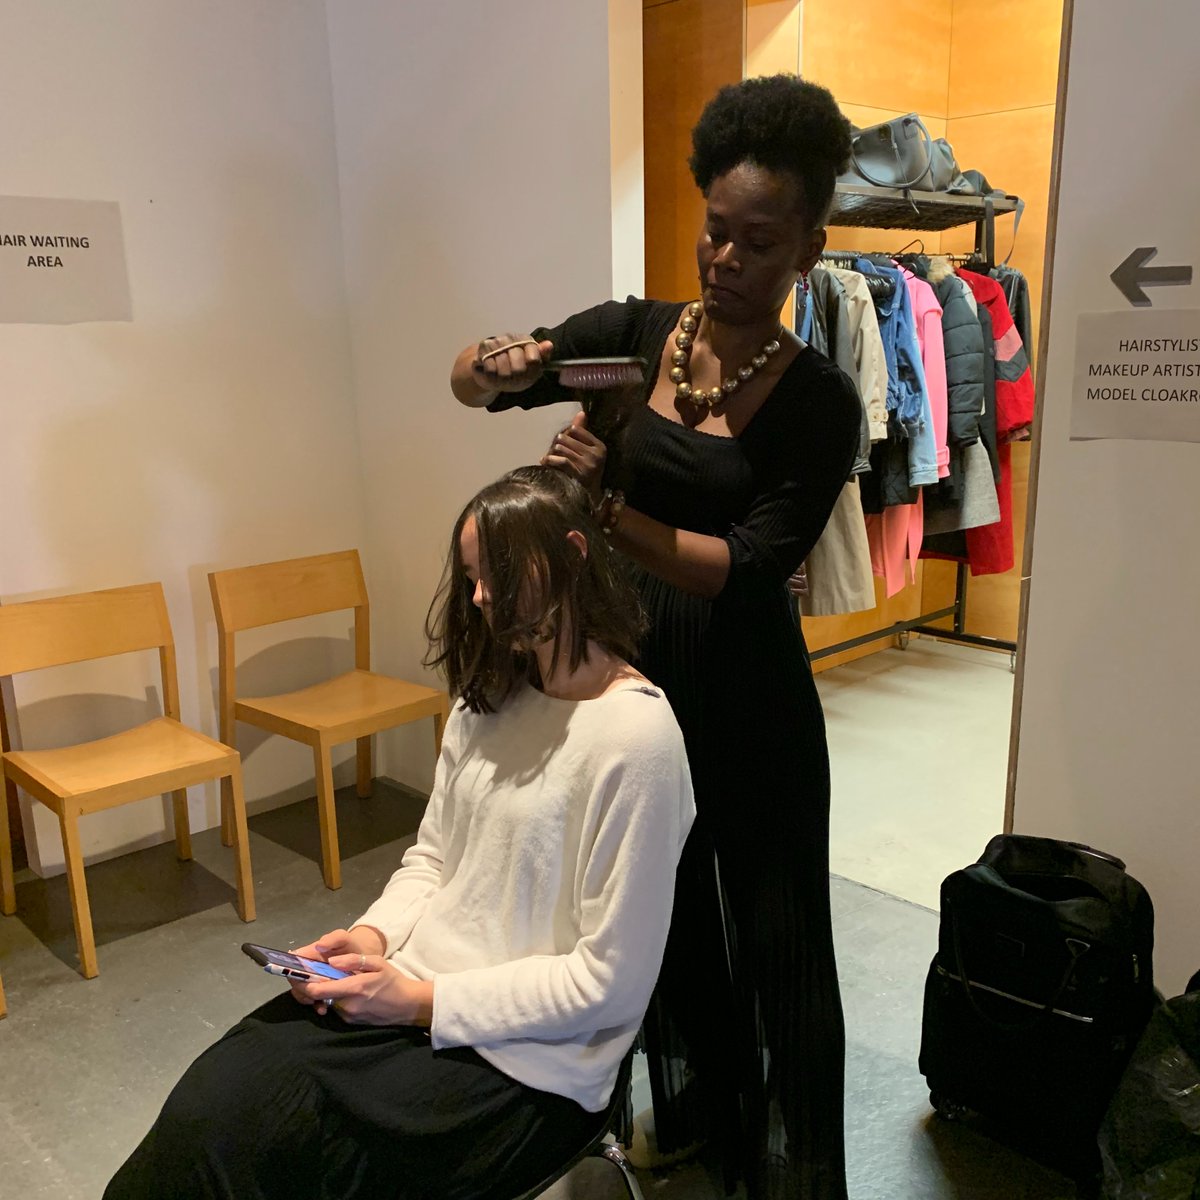 Our Hairdressing students recently helped showcase the work of the style icons of tomorrow at the Glasgow School of Art Fashion Show. The models all looked fabulous with not a hair out of place! #youcan #glasgowclydecollege #studywhatyoulove #hairstylist #glasgowschoolofart